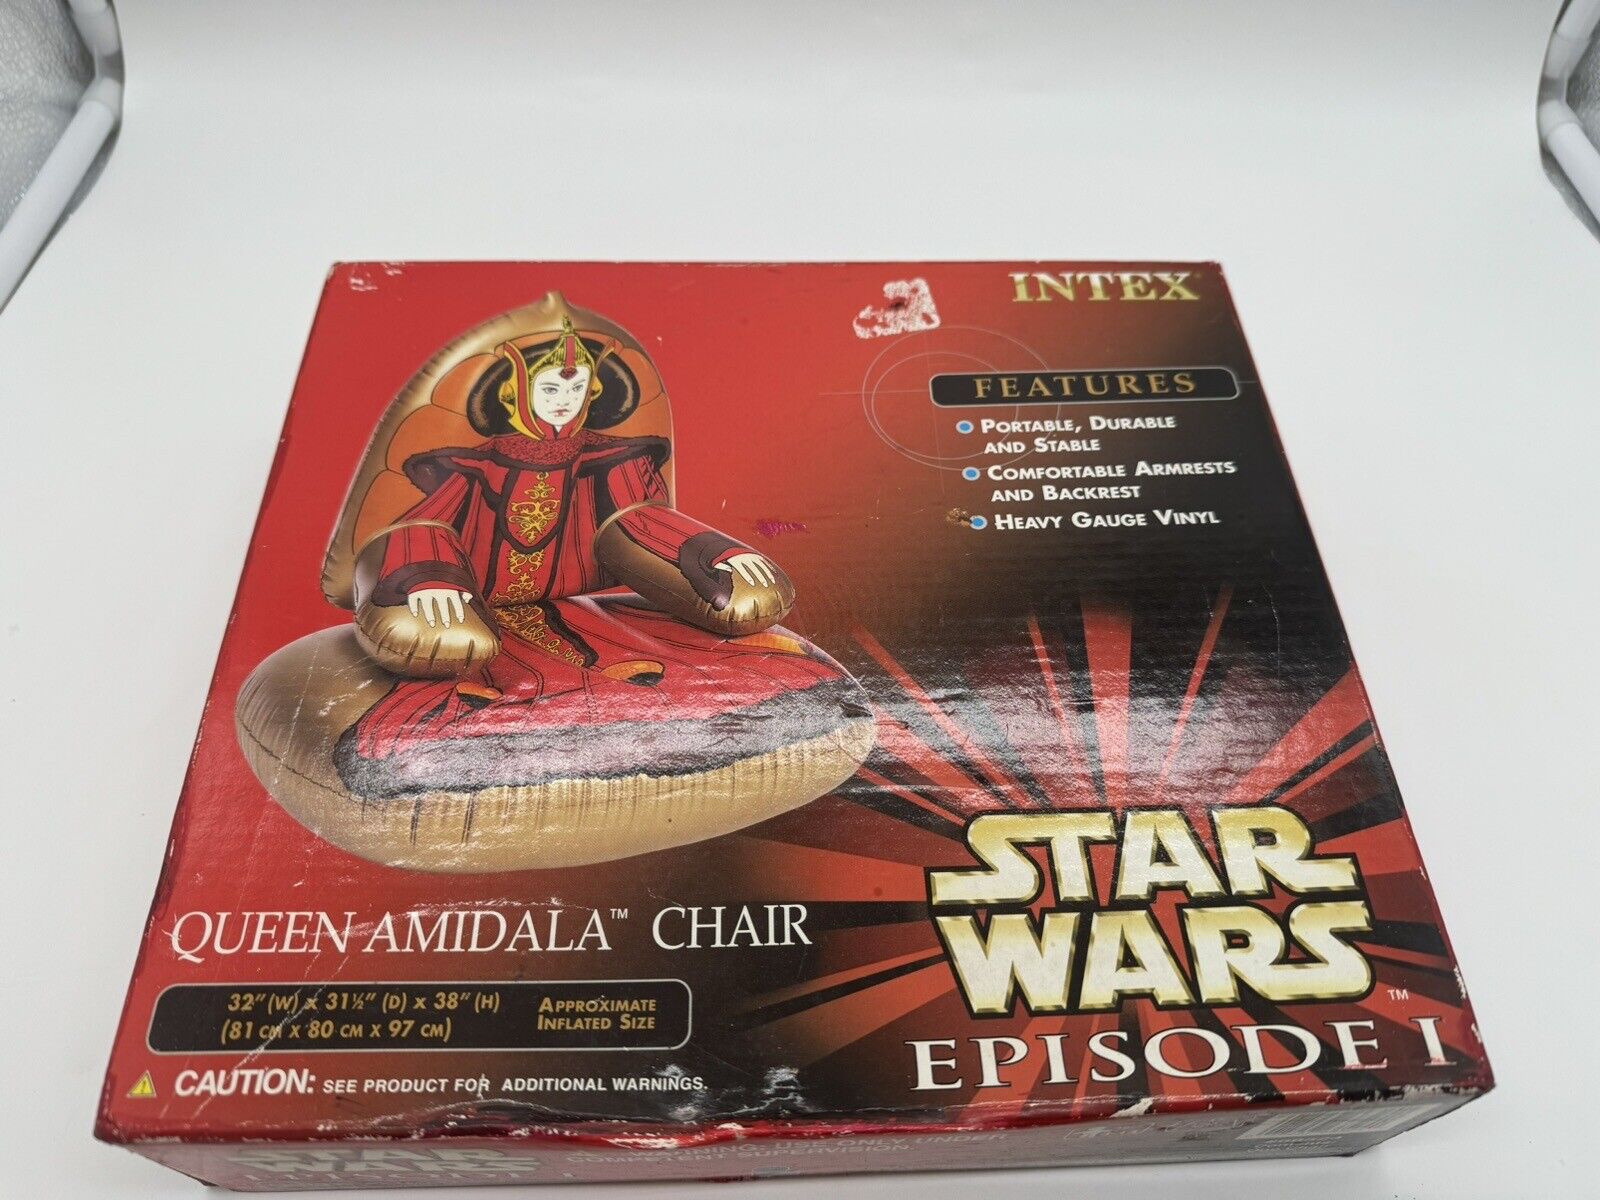  Star Wars EPISODE 1 QUEEN AMIDALA Intex Inflatable Chair - New/Sealed